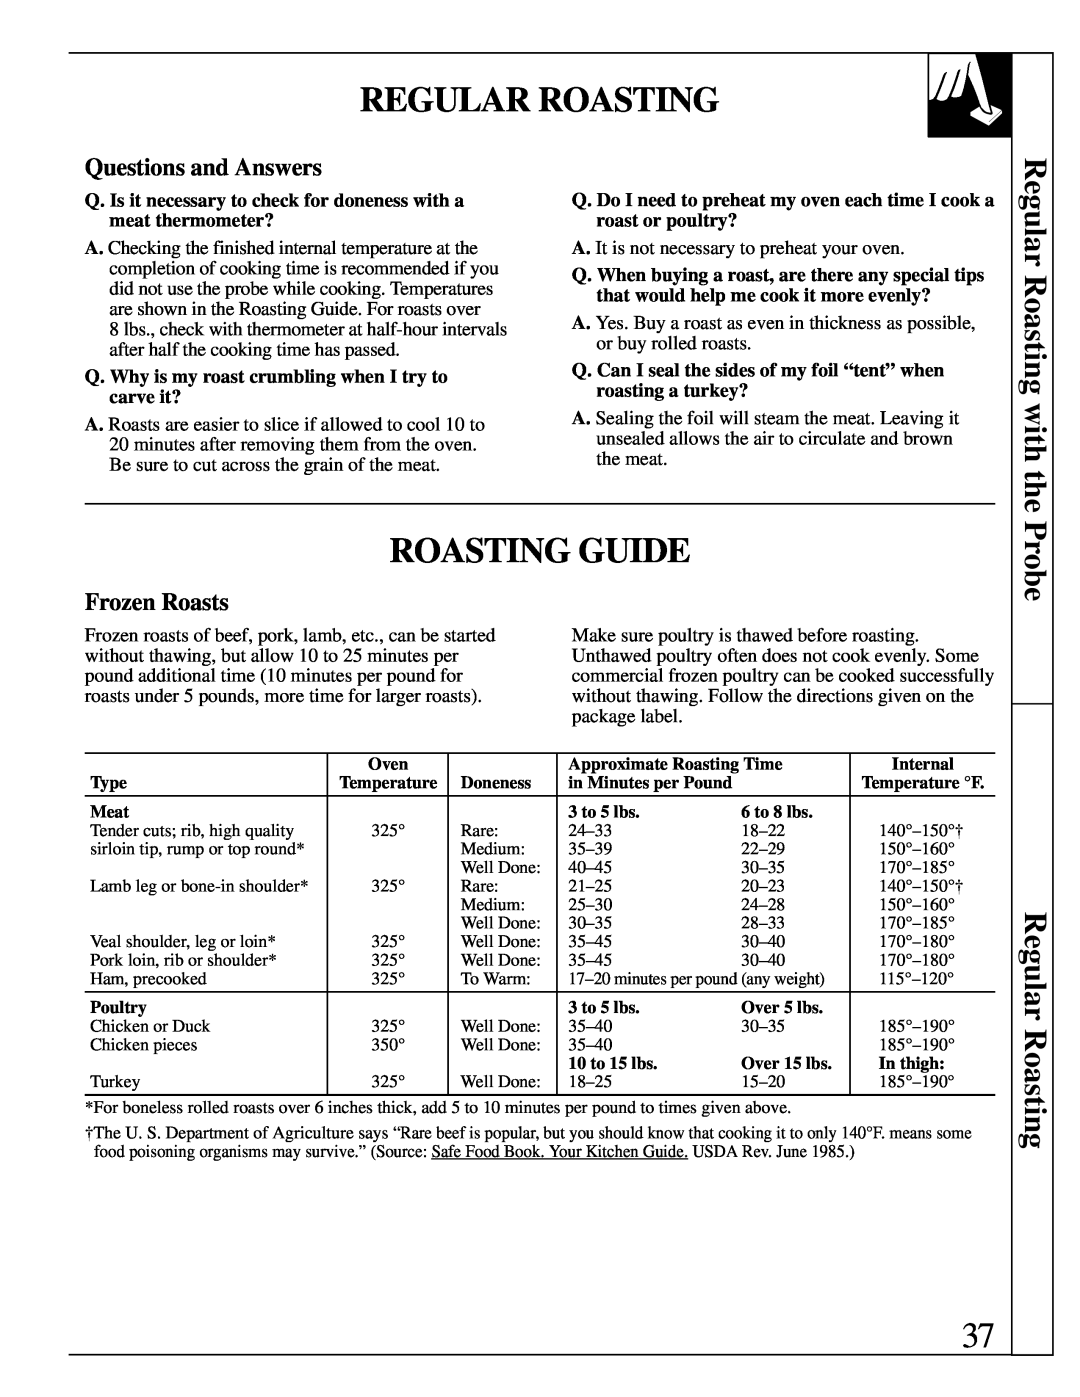 GE JBP95 warranty Roasting Guide, Regular Roasting with the, Questions and Answers, Frozen Roasts 